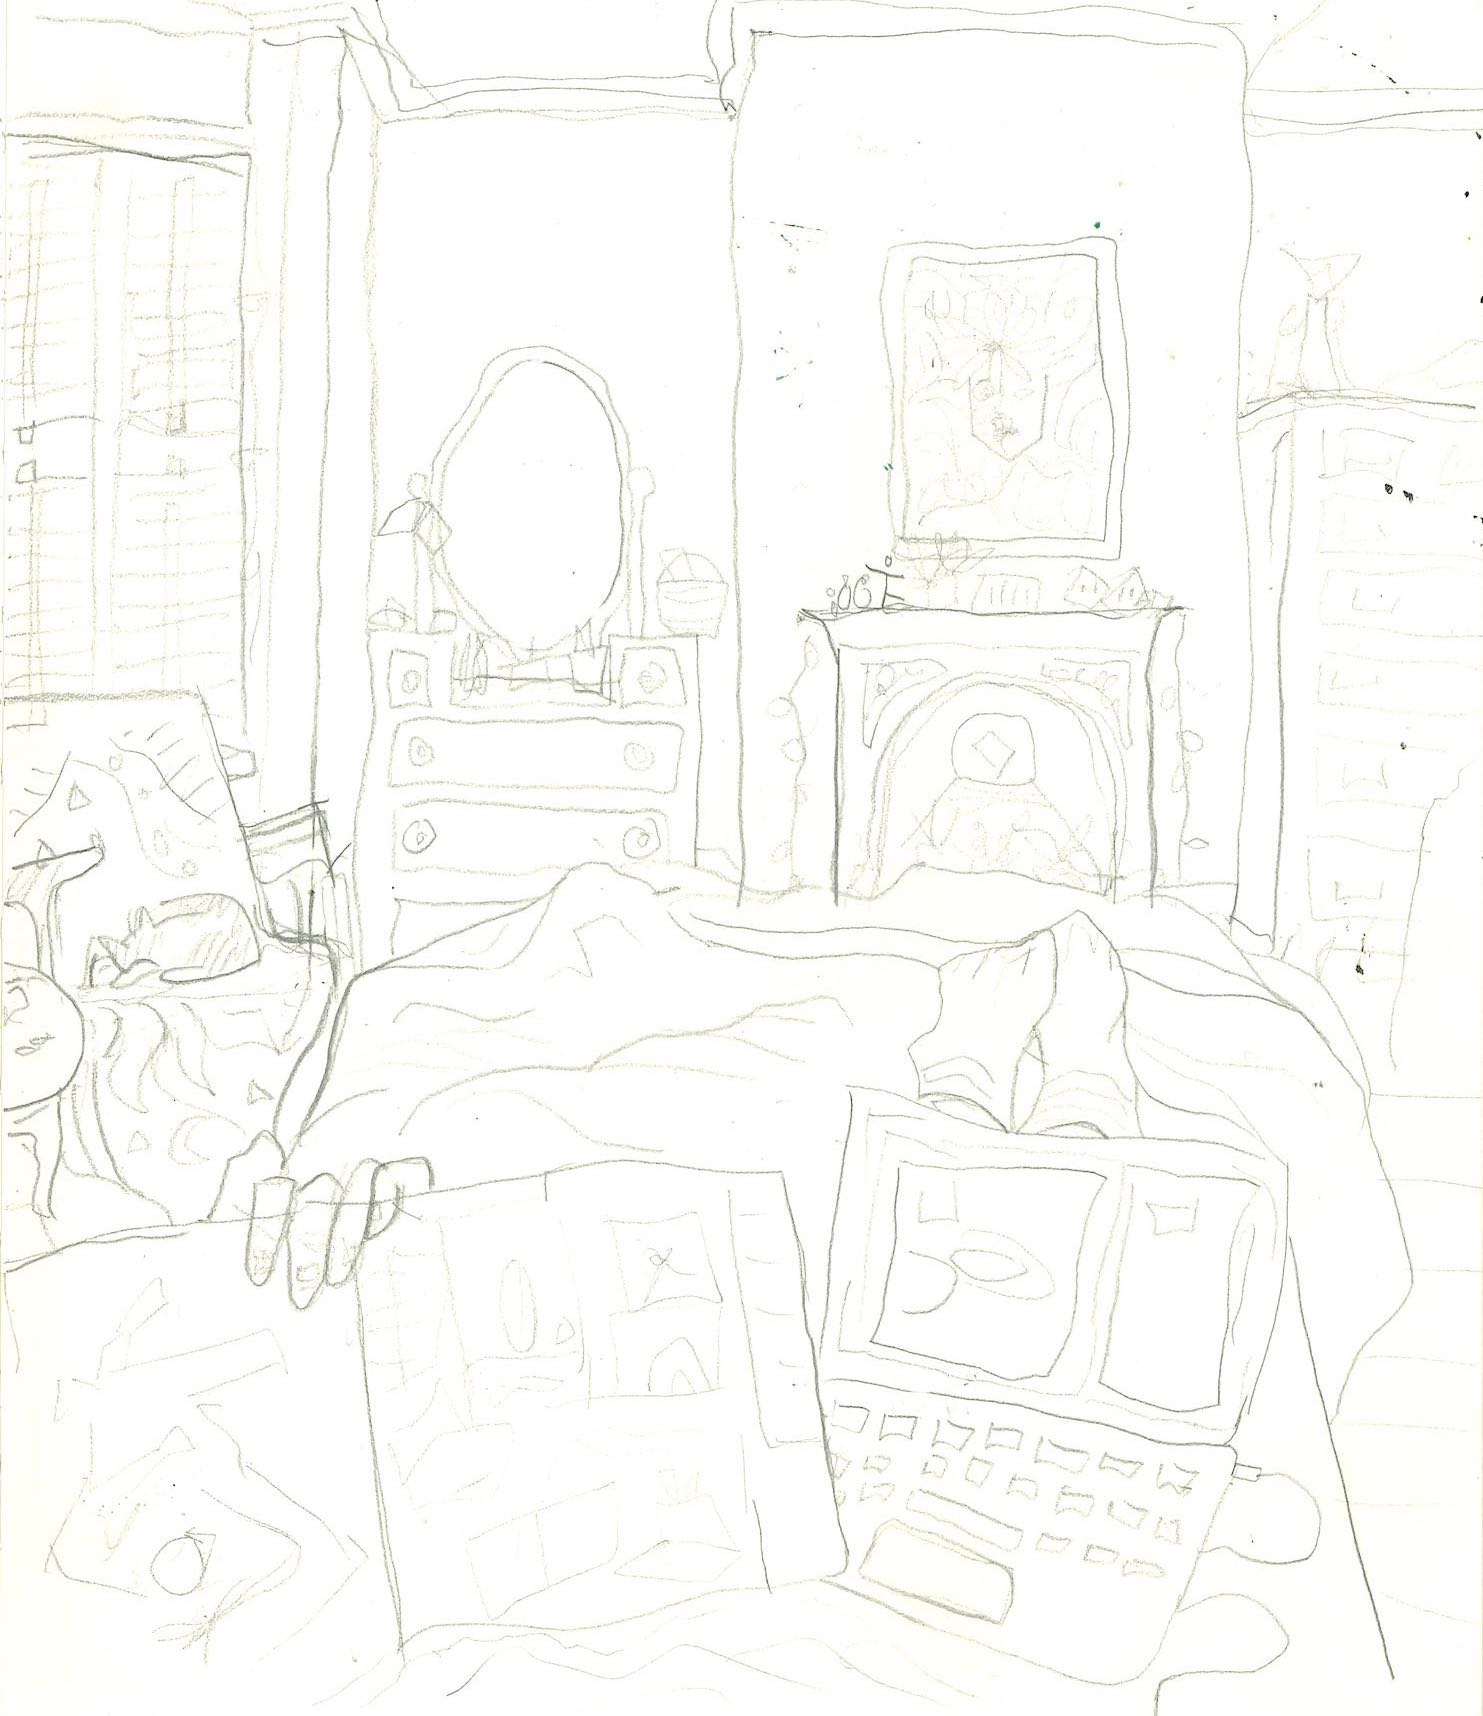 Pencil sketch of bedroom seen from viewpoint of bed with sketchbook, dressing table, poster, cat on chair, chest of drawers and fireplace